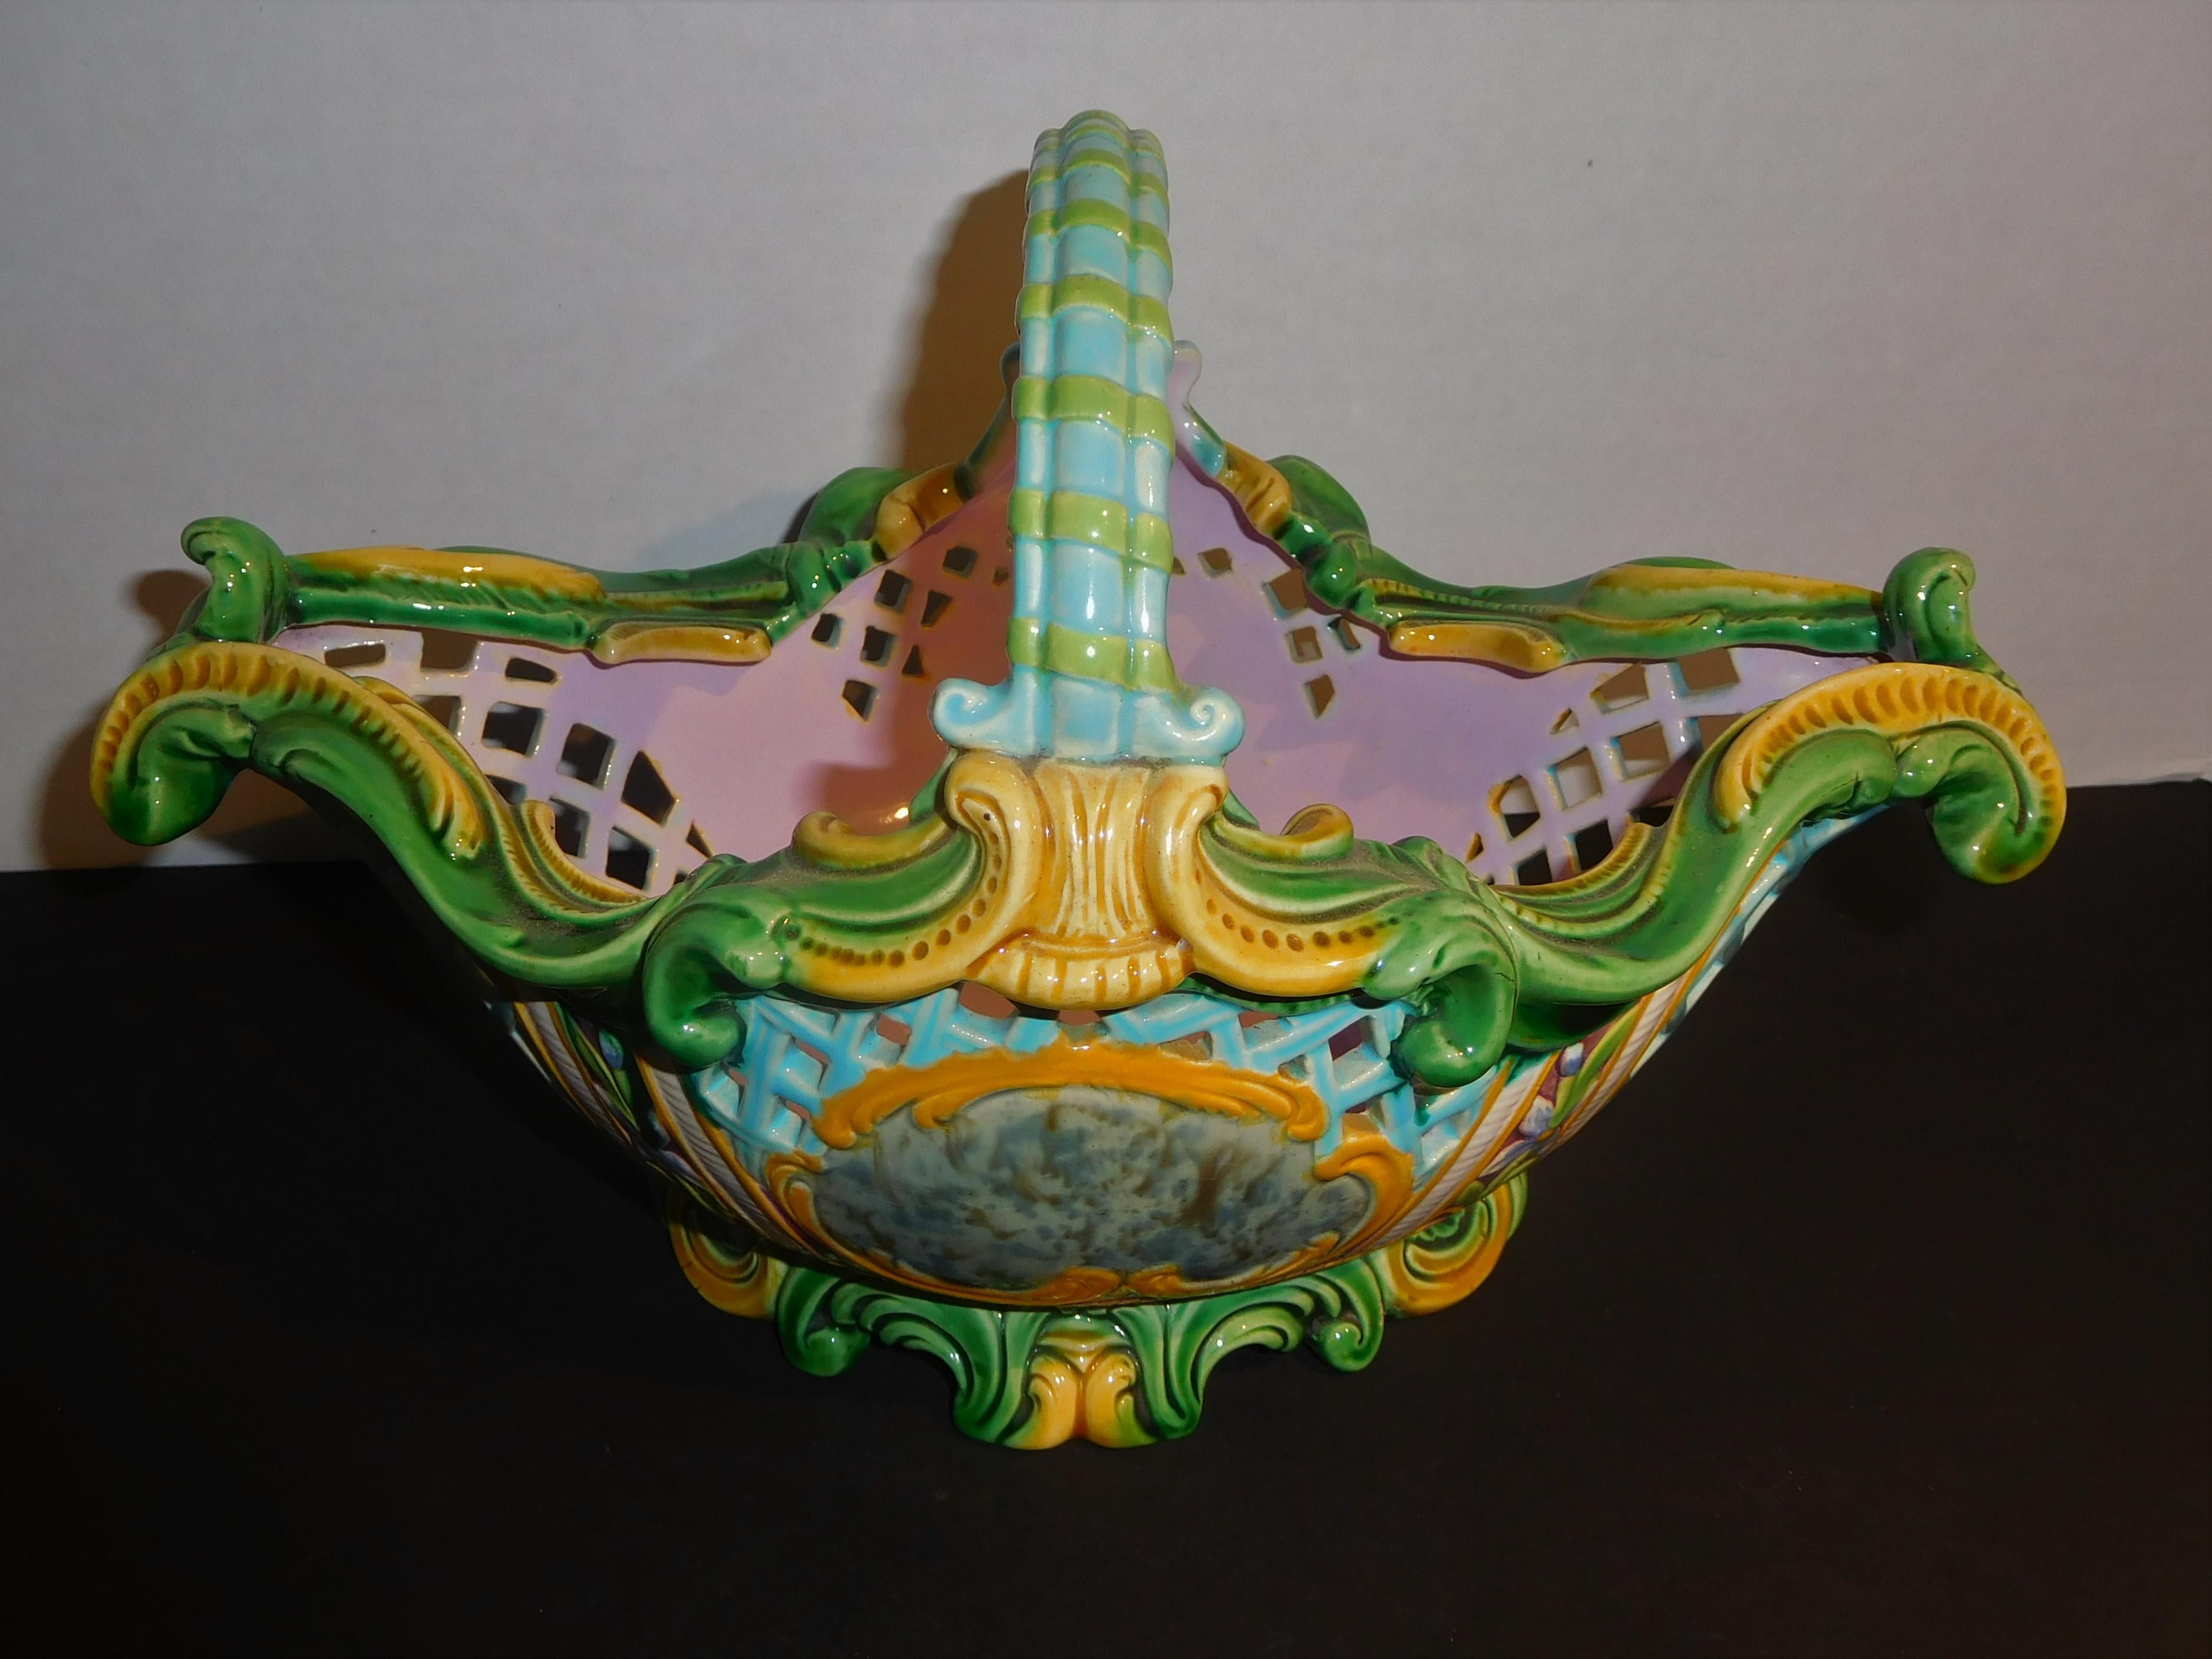 This majolica berry basket has reticulated sides to allow air flow around the fruit. The detailed handwork is meticulous and the colors are fanciful, with a lavender interior and blue, green, yellow and grey exterior. The basket is unmarked, but I